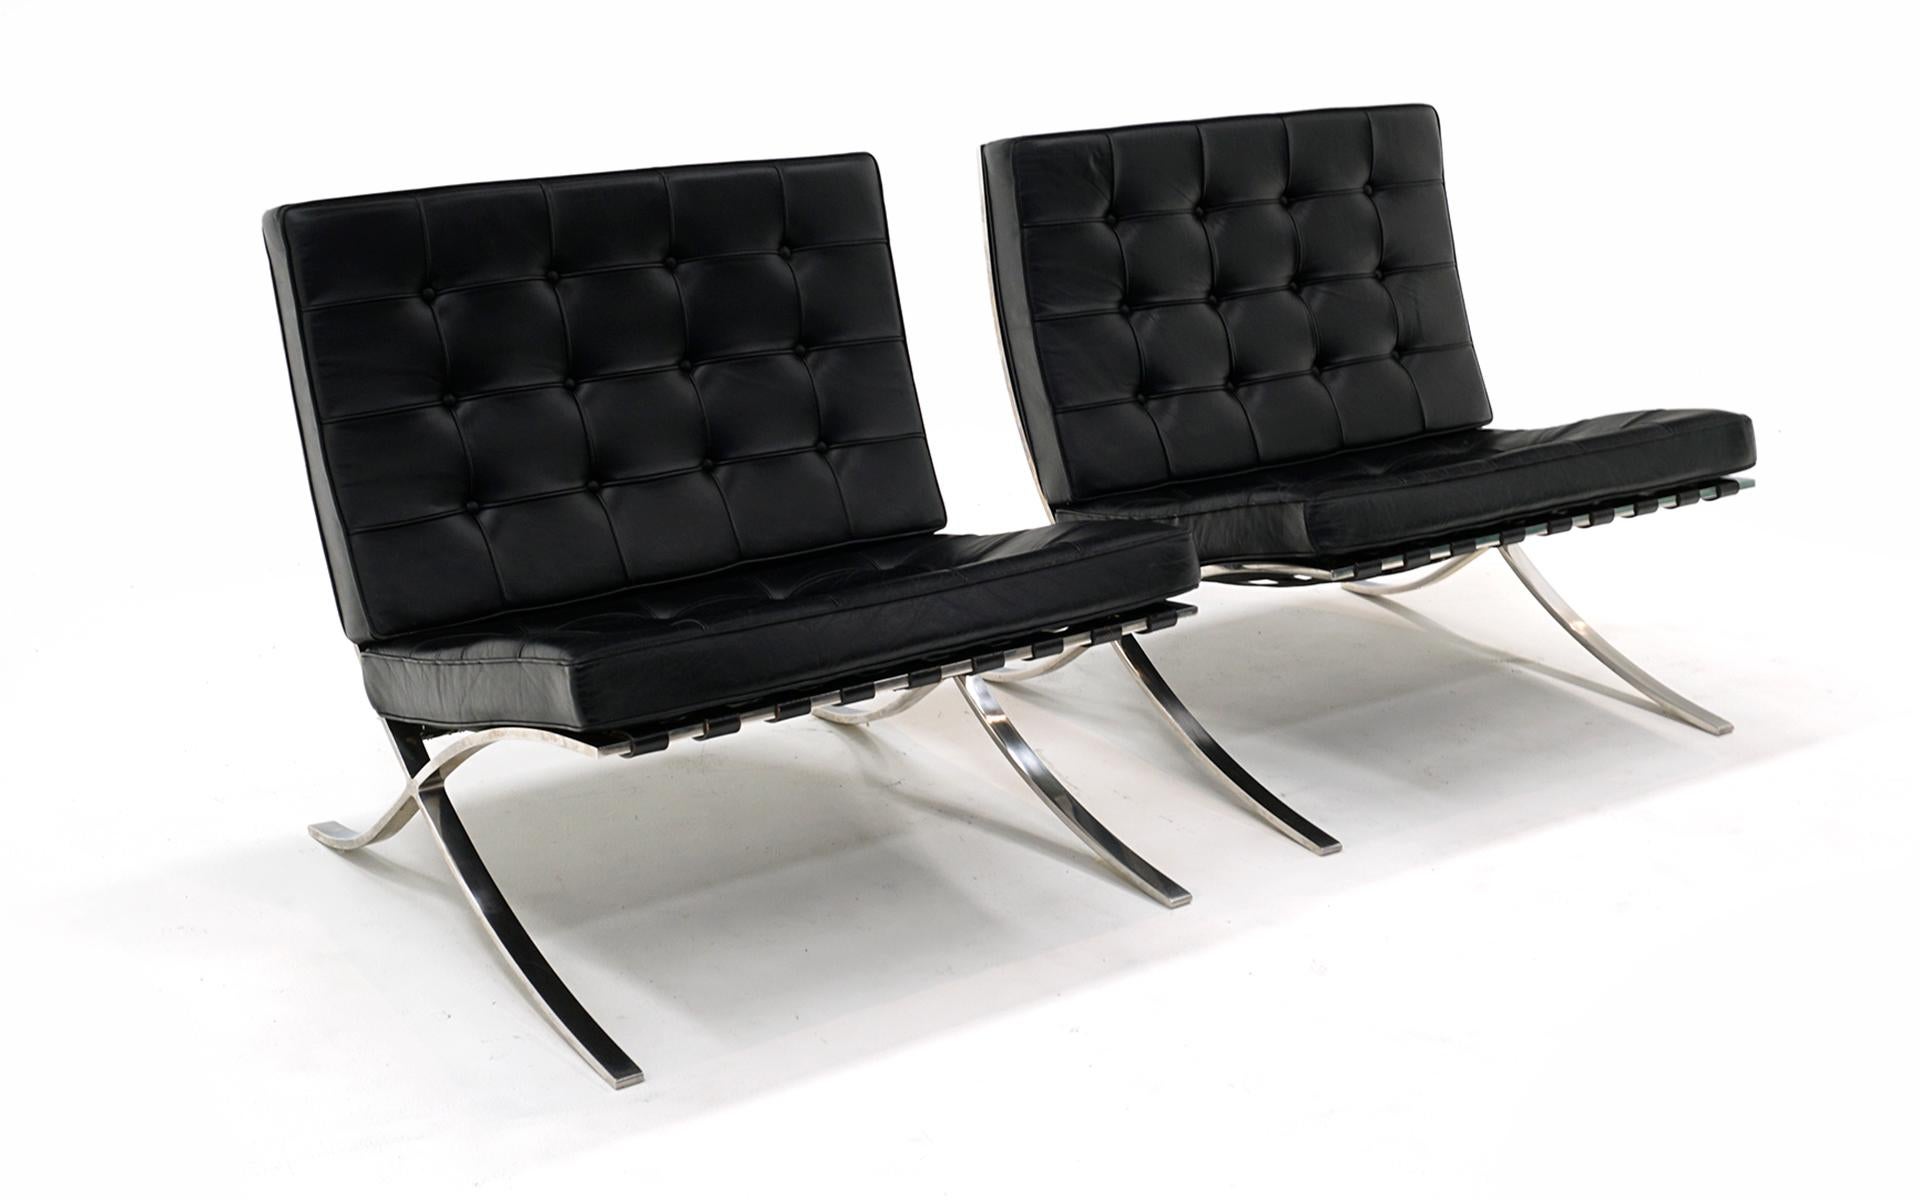 All original timeless classic pair of black leather and hand polished stainless steel Barcelona chairs. Designed by Mies van de Rohe in 1929, this pair was produced in the 1970s. Very good condition with no tears, holes or repairs to the leather.